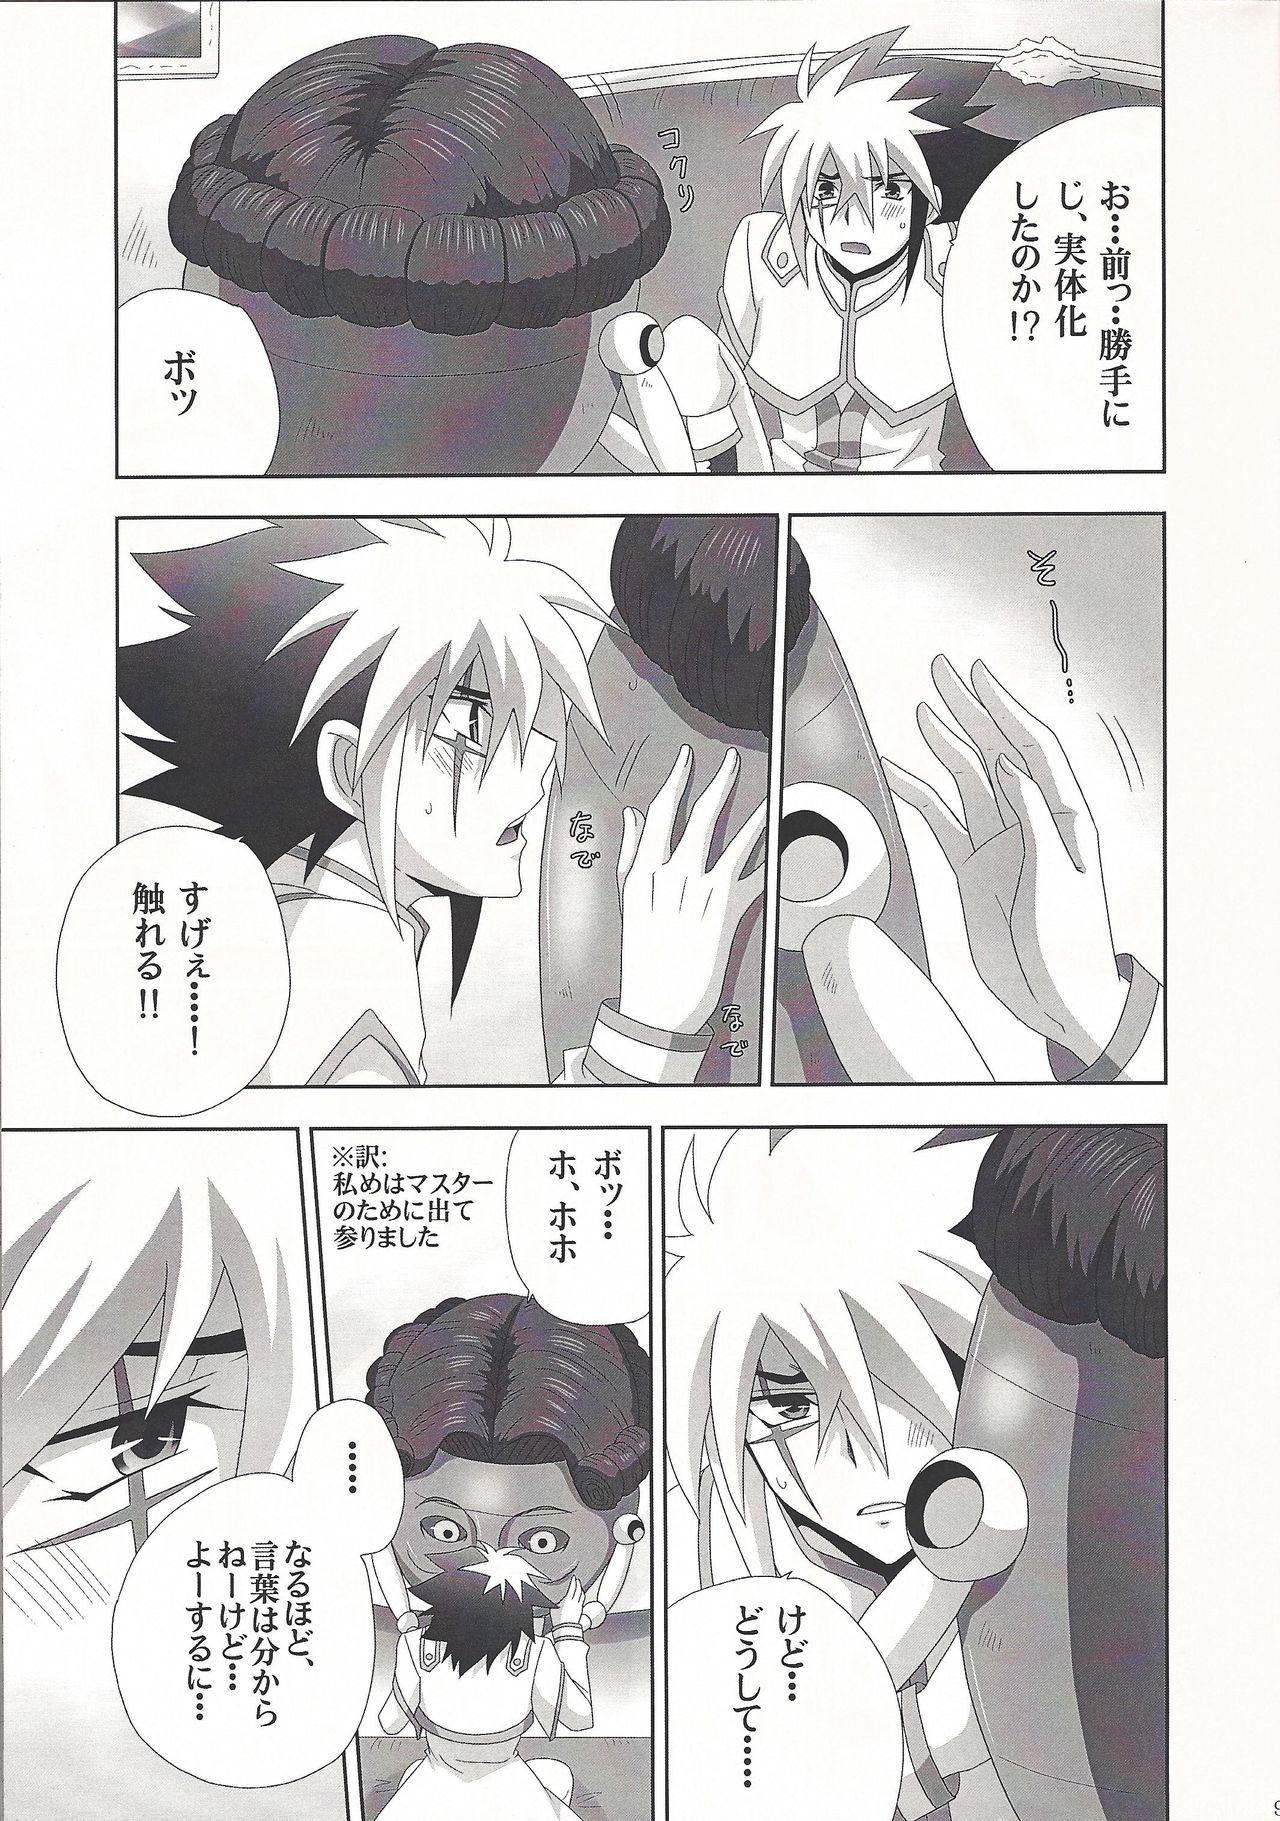 Jerk PuppetPlay - Yu gi oh zexal With - Page 8